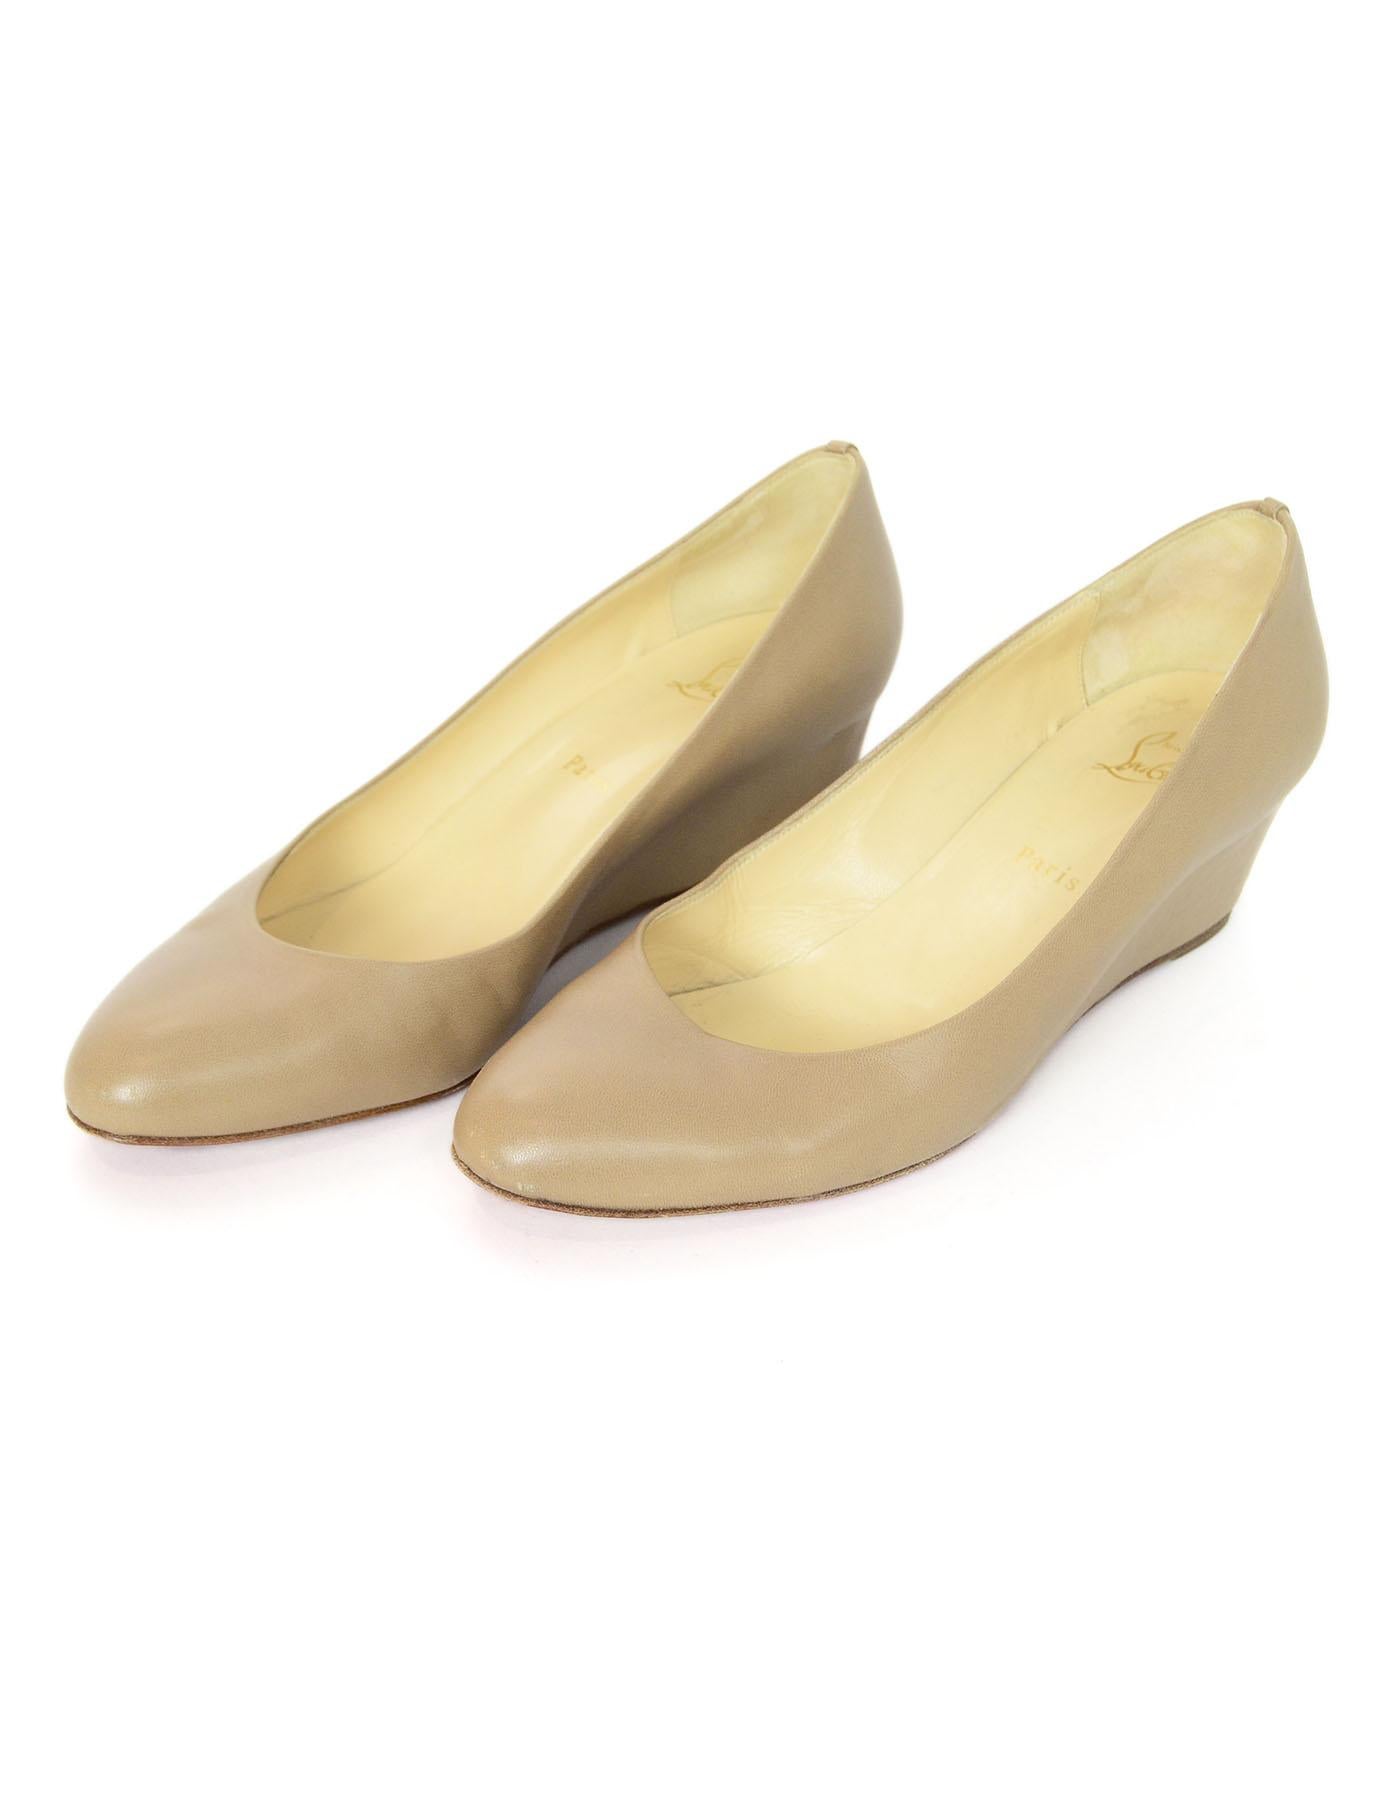 Christian Louboutin Nude Leather Wedges Sz 41

Made In: Italy
Color: Nude
Materials: Leather
Closure/Opening: Slide on
Sole Stamp: Christian Louboutin Paris 41
Overall Condition: Excellent pre-owned condition with the exception of some wear at